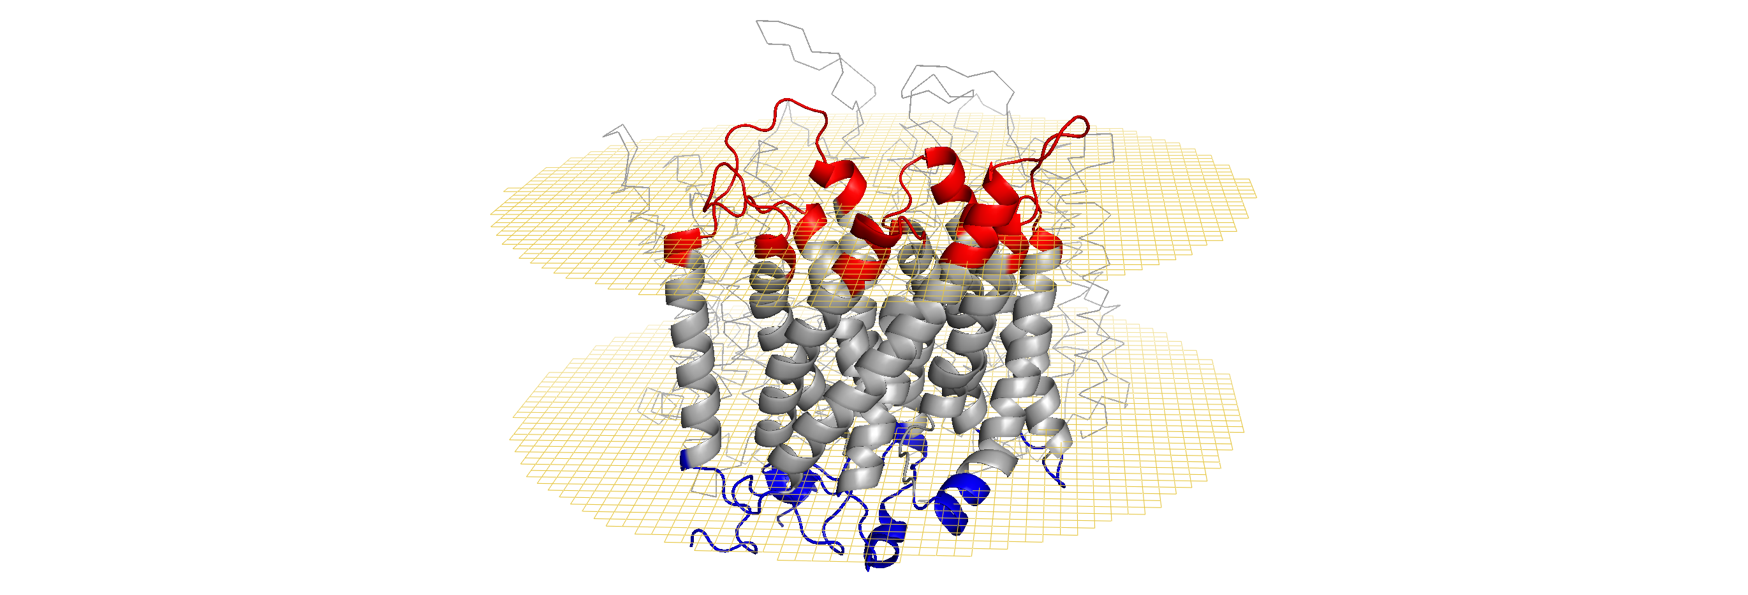 Three-dimensional view of the RHD structure